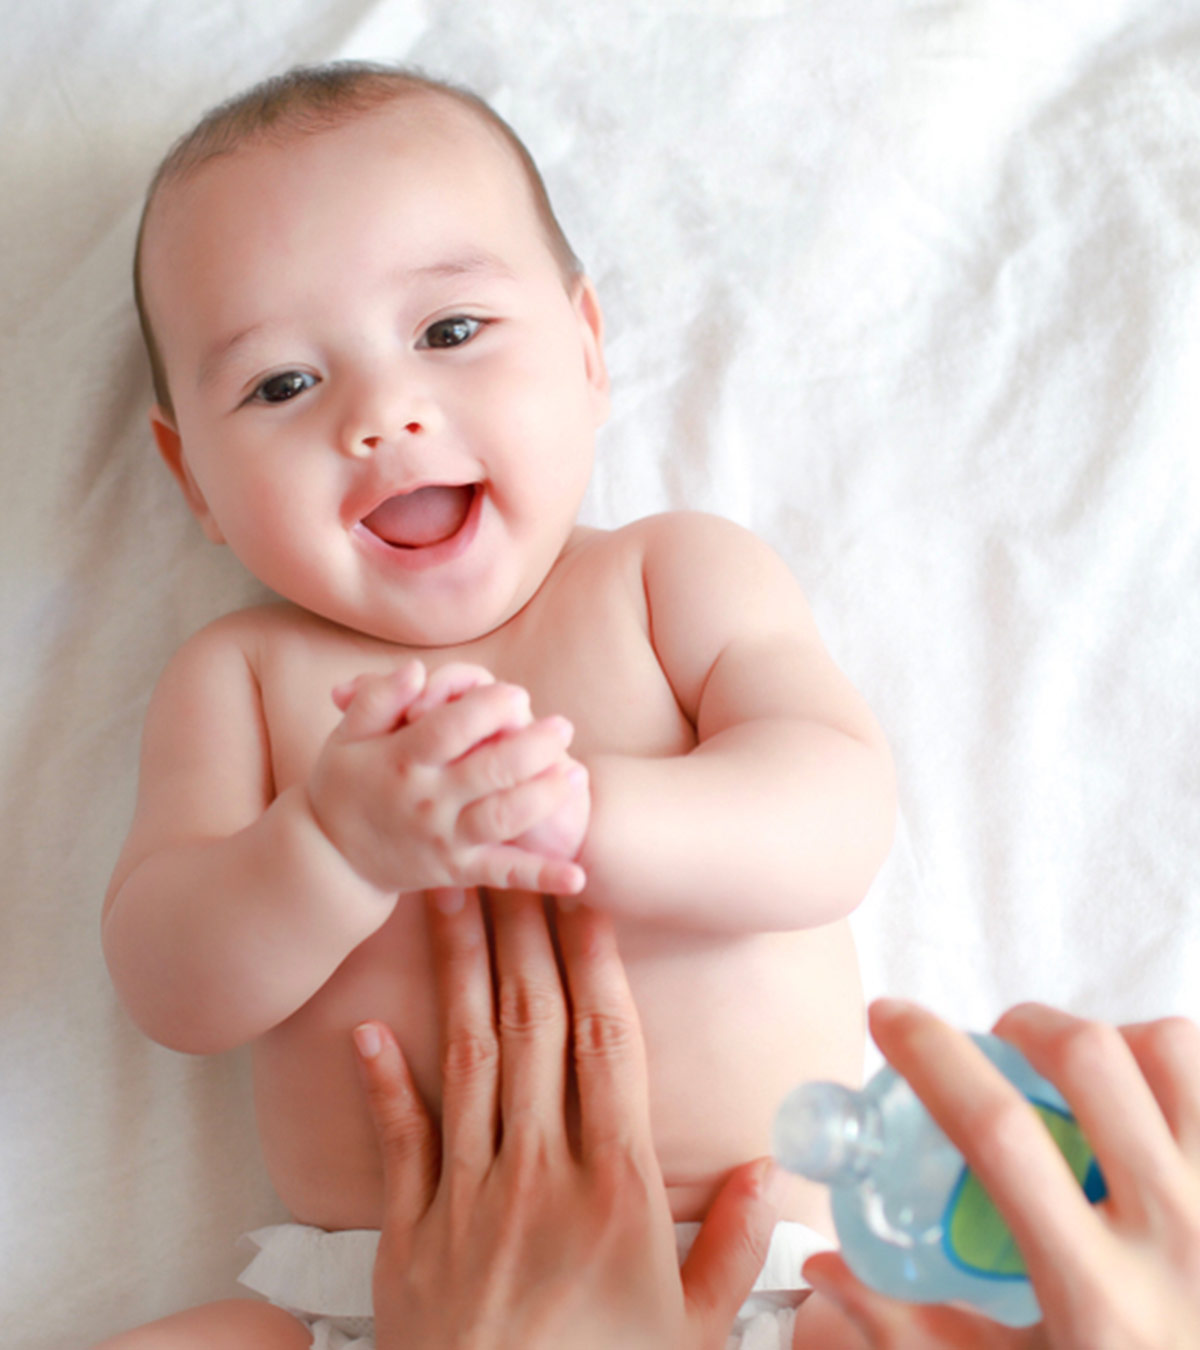 Top 12 Safe Essential Oils For Babies And How To Use Them